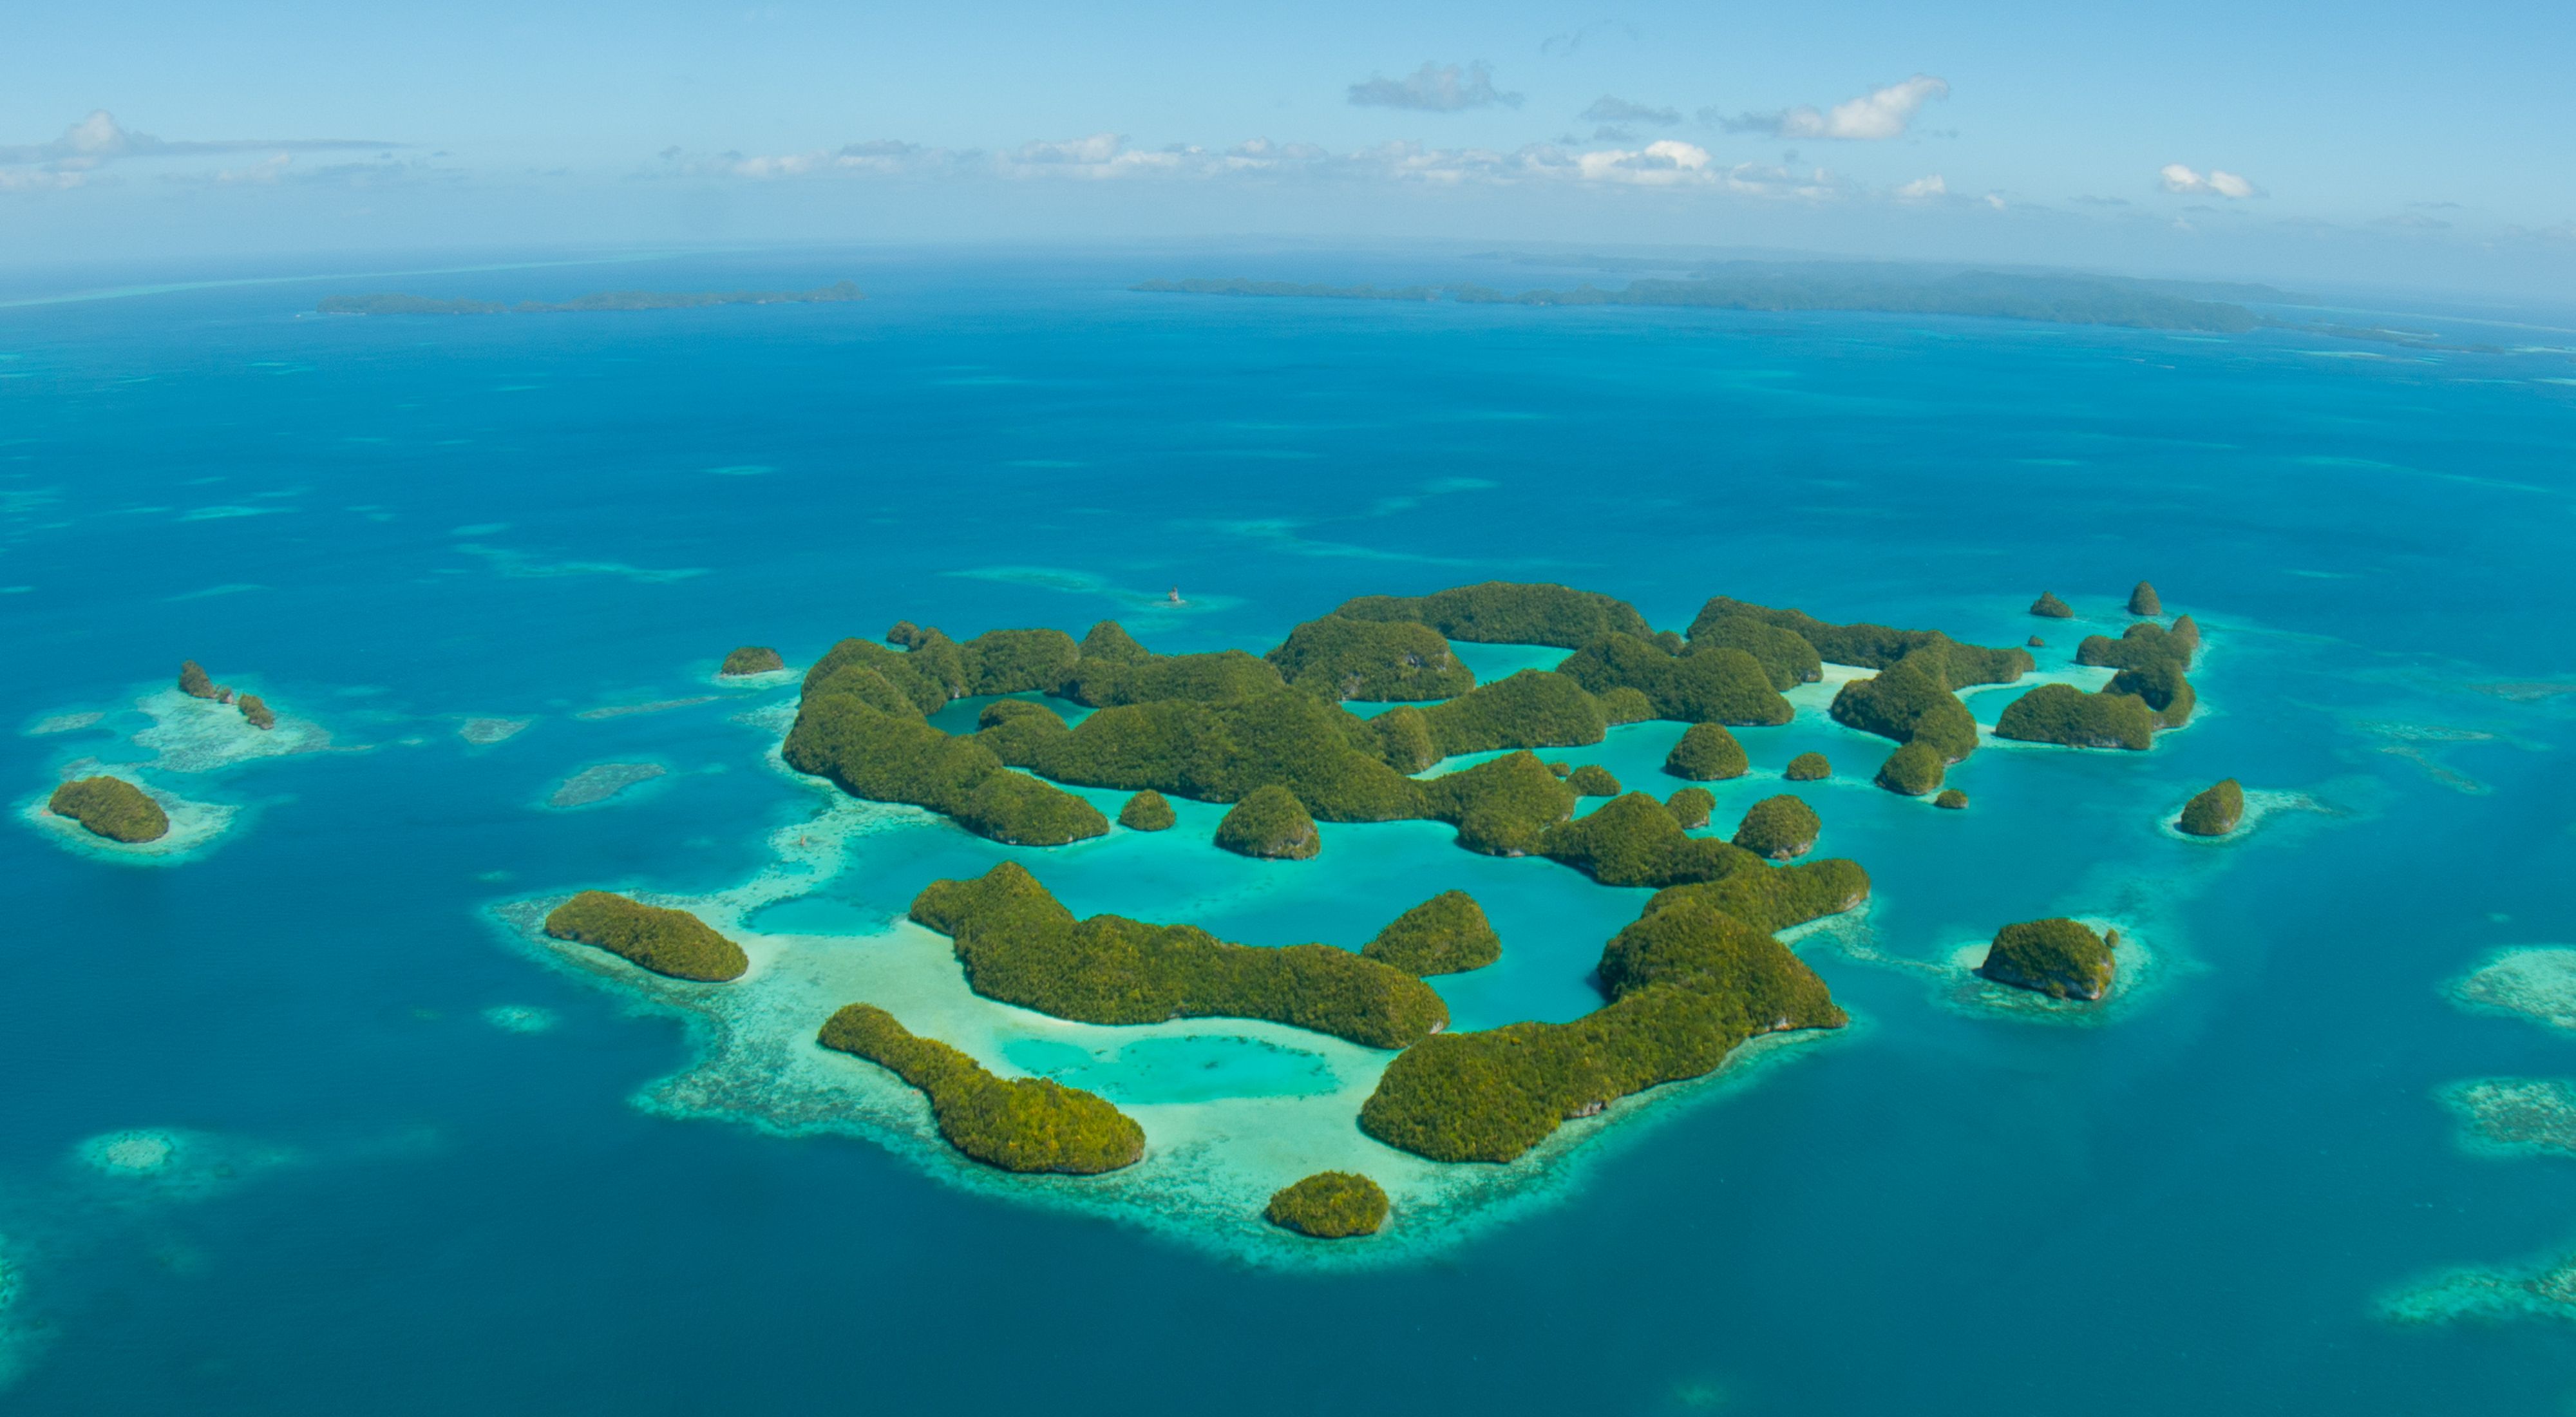 an aerial view of Palau's islands and aqua-blue ocean waters